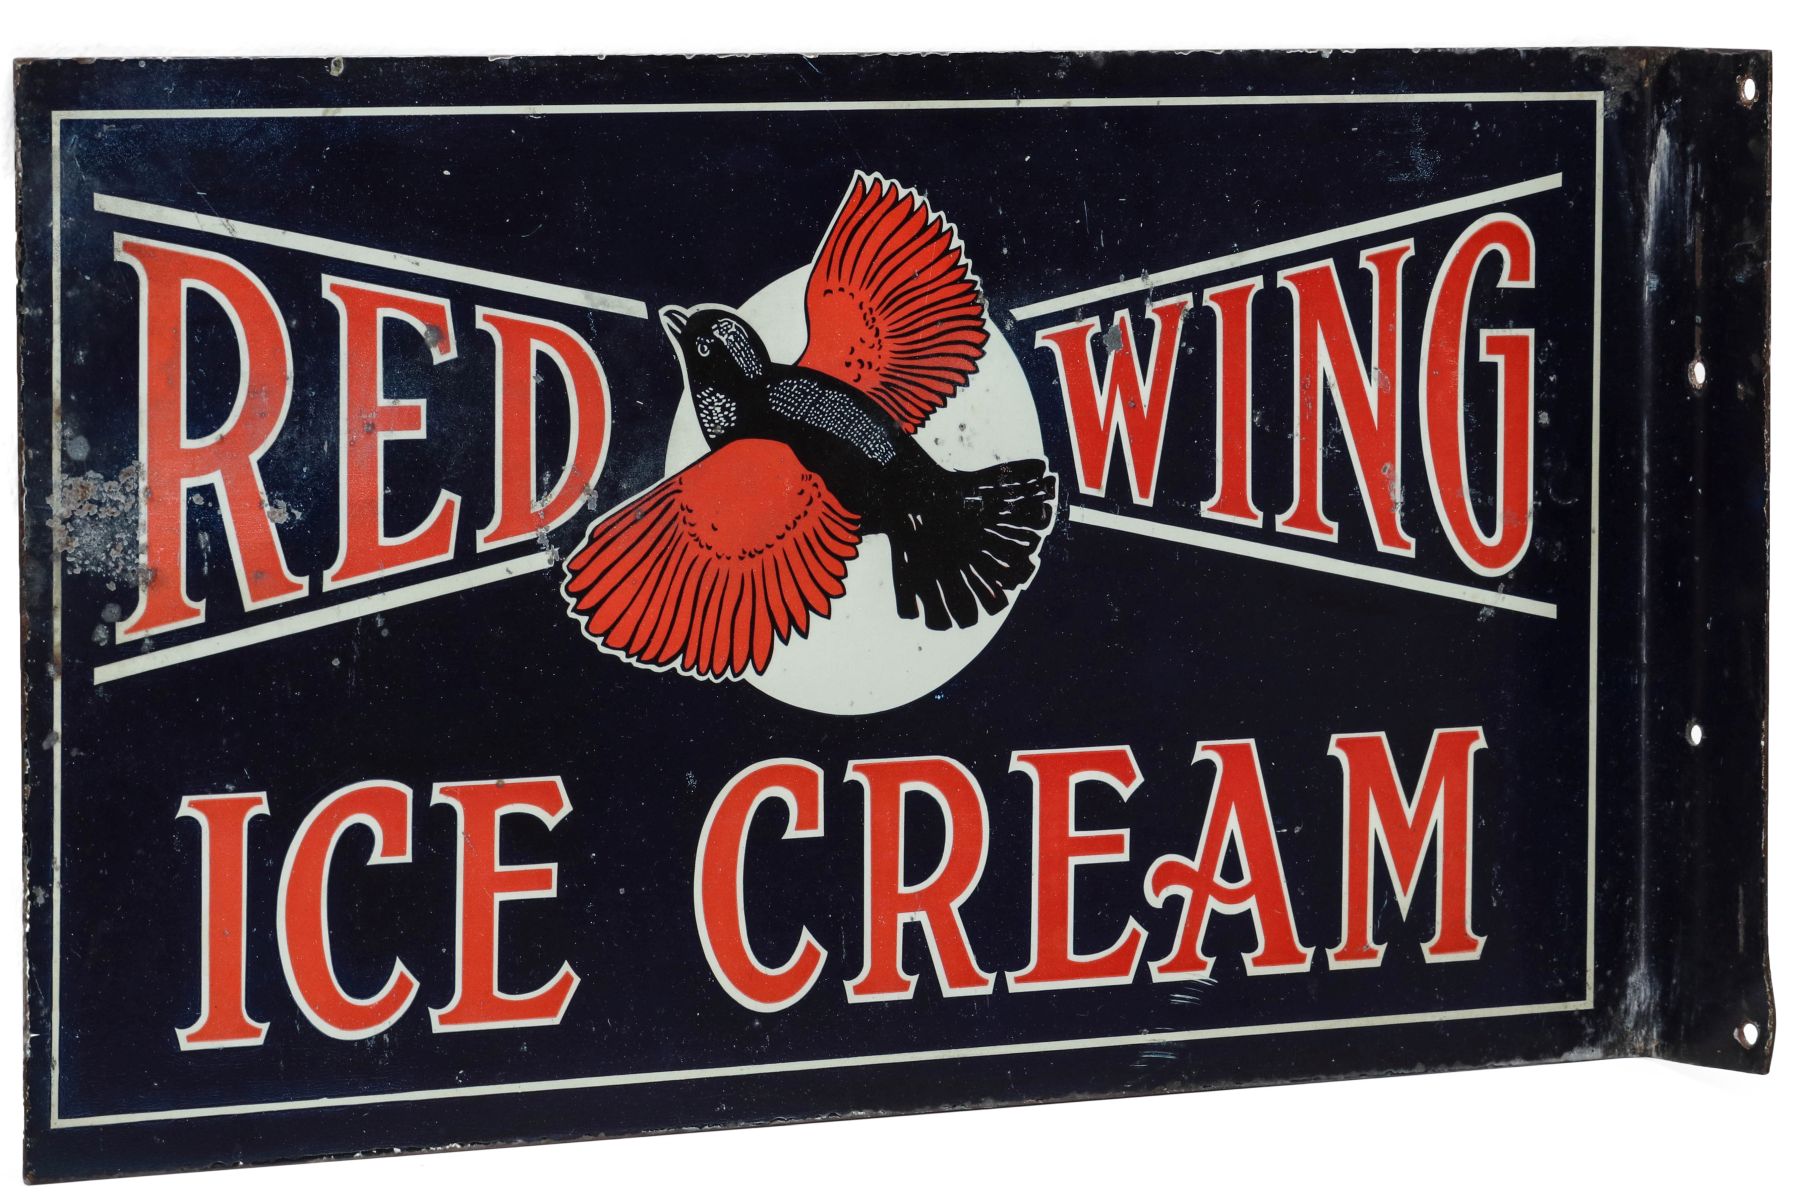 A PORCELAIN ENAMEL FLANGE SIGN FOR RED WING ICE CREAM